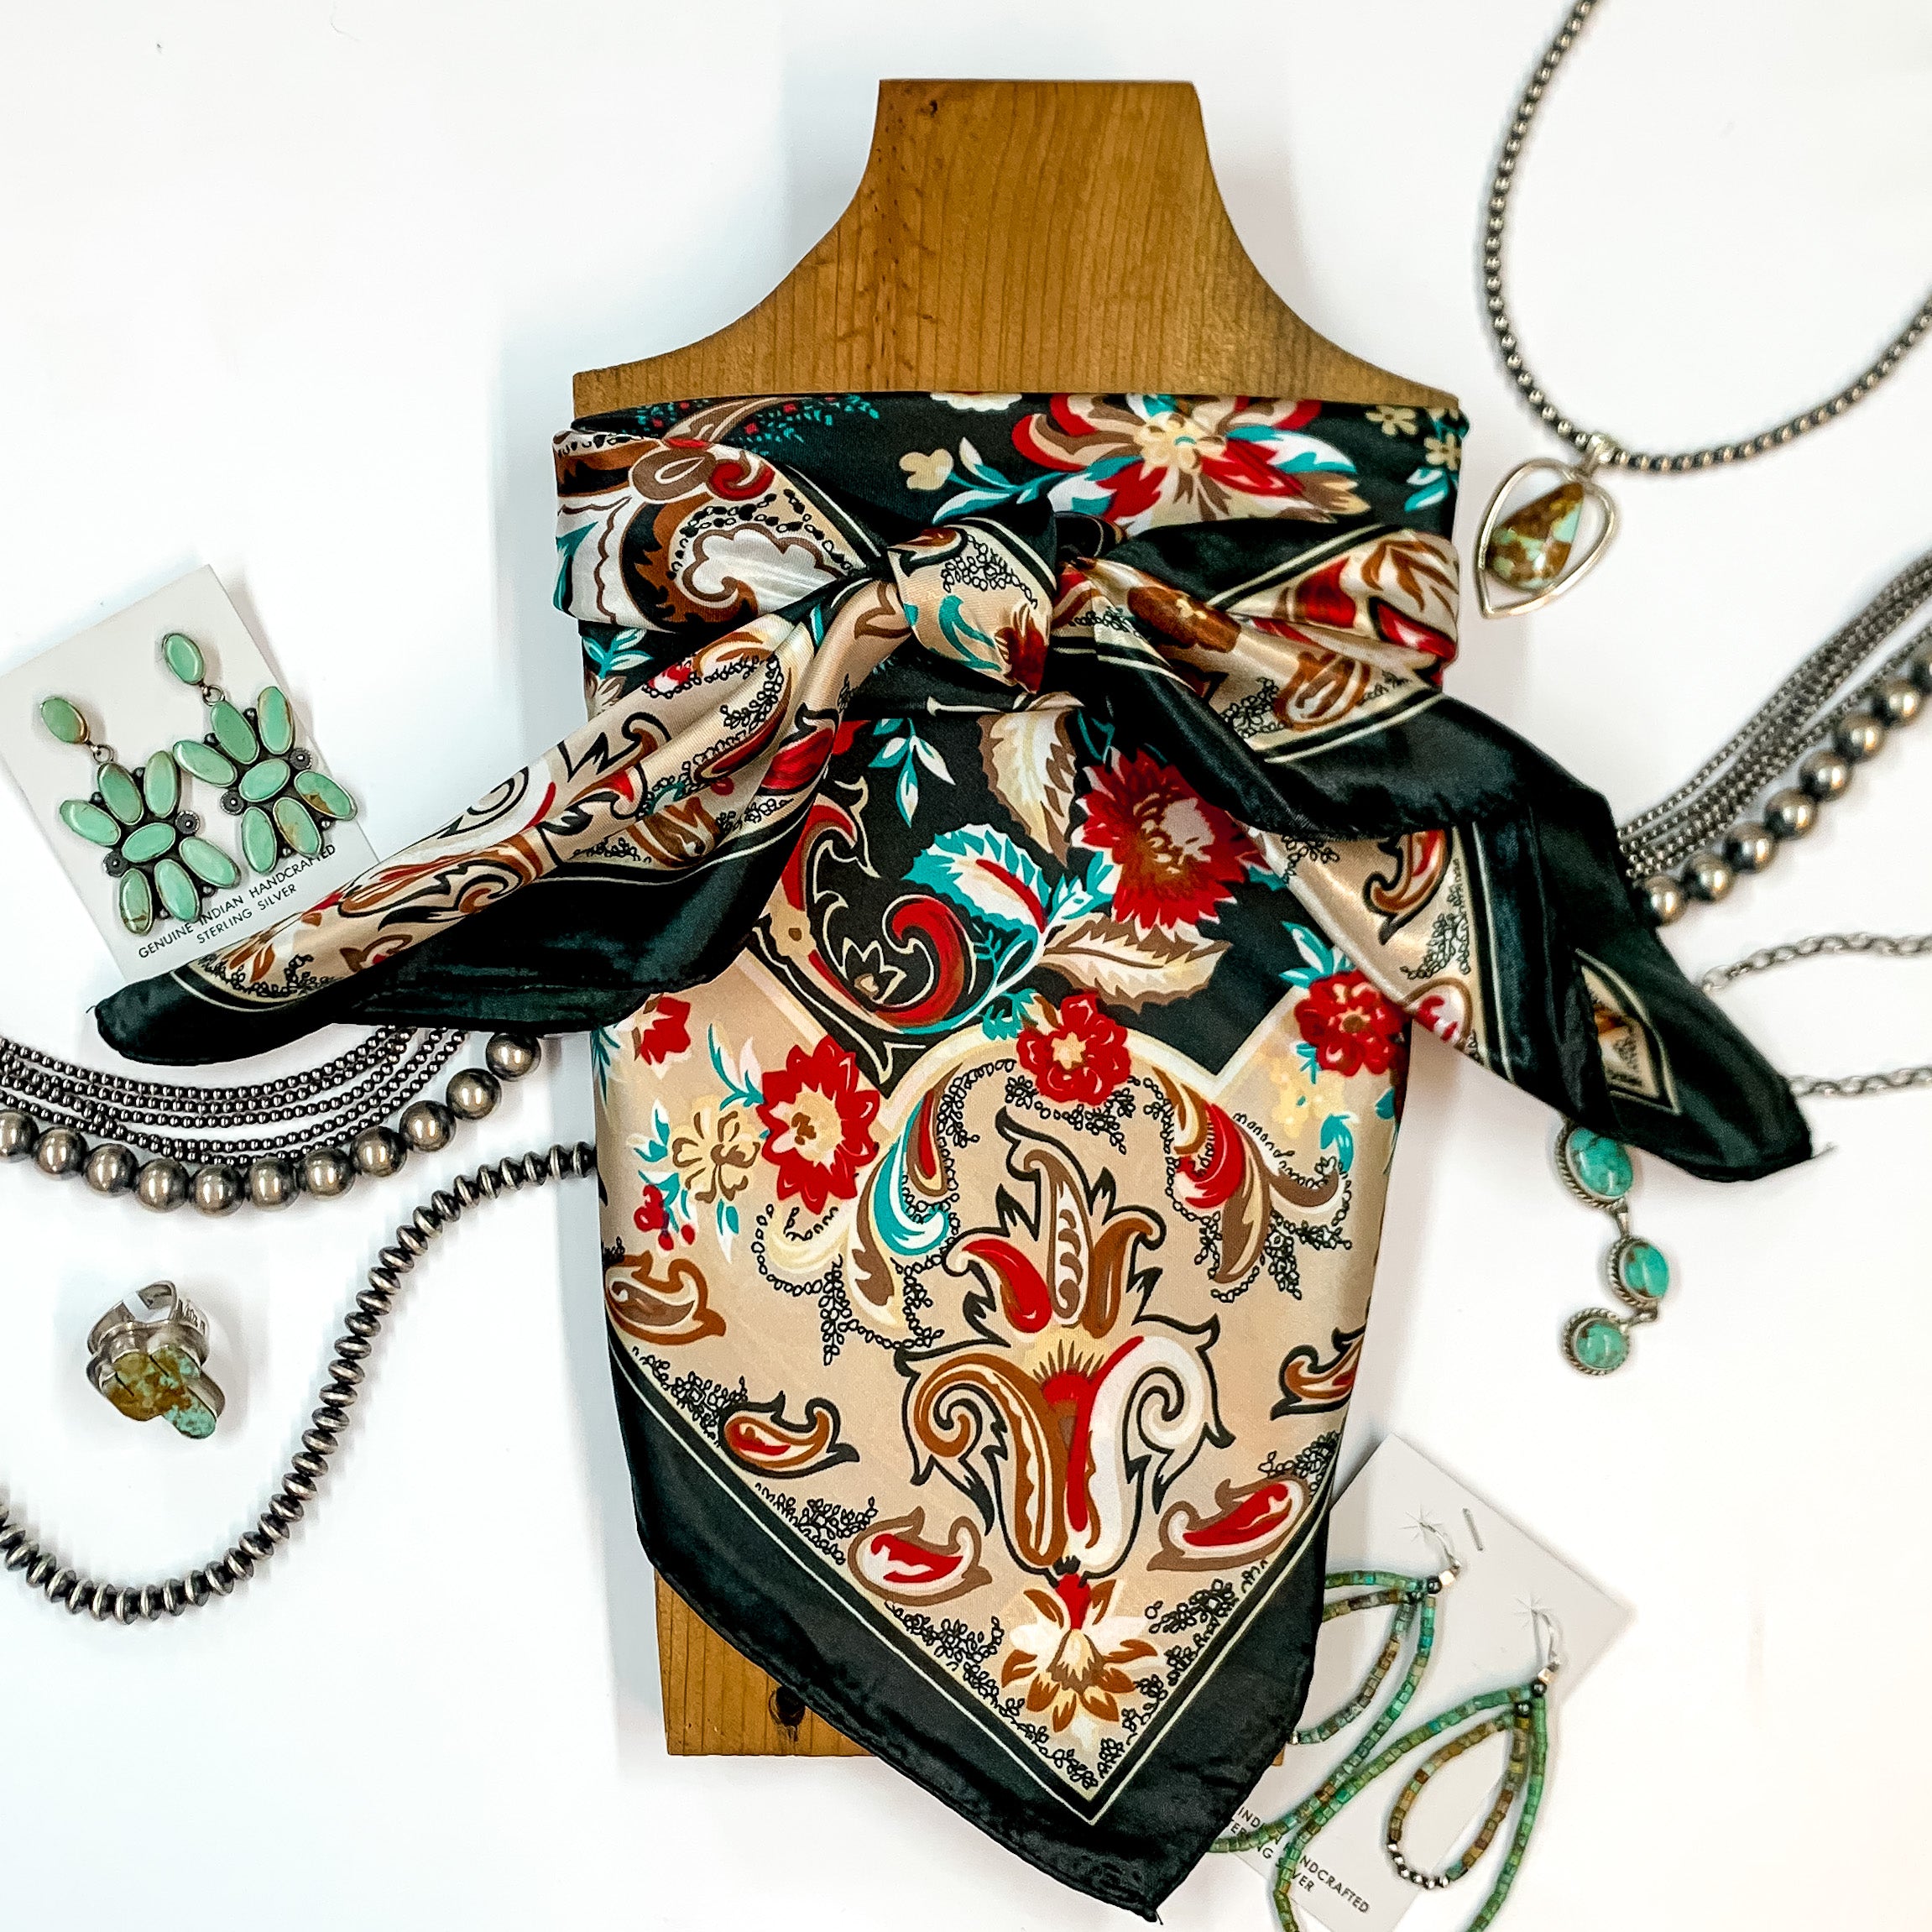 Patterned scarf in Quail Creek. Scarf is tied around a wooden piece. The scarf and piece of wood is pictured on a white background with Navajo jewelry spread out around it.